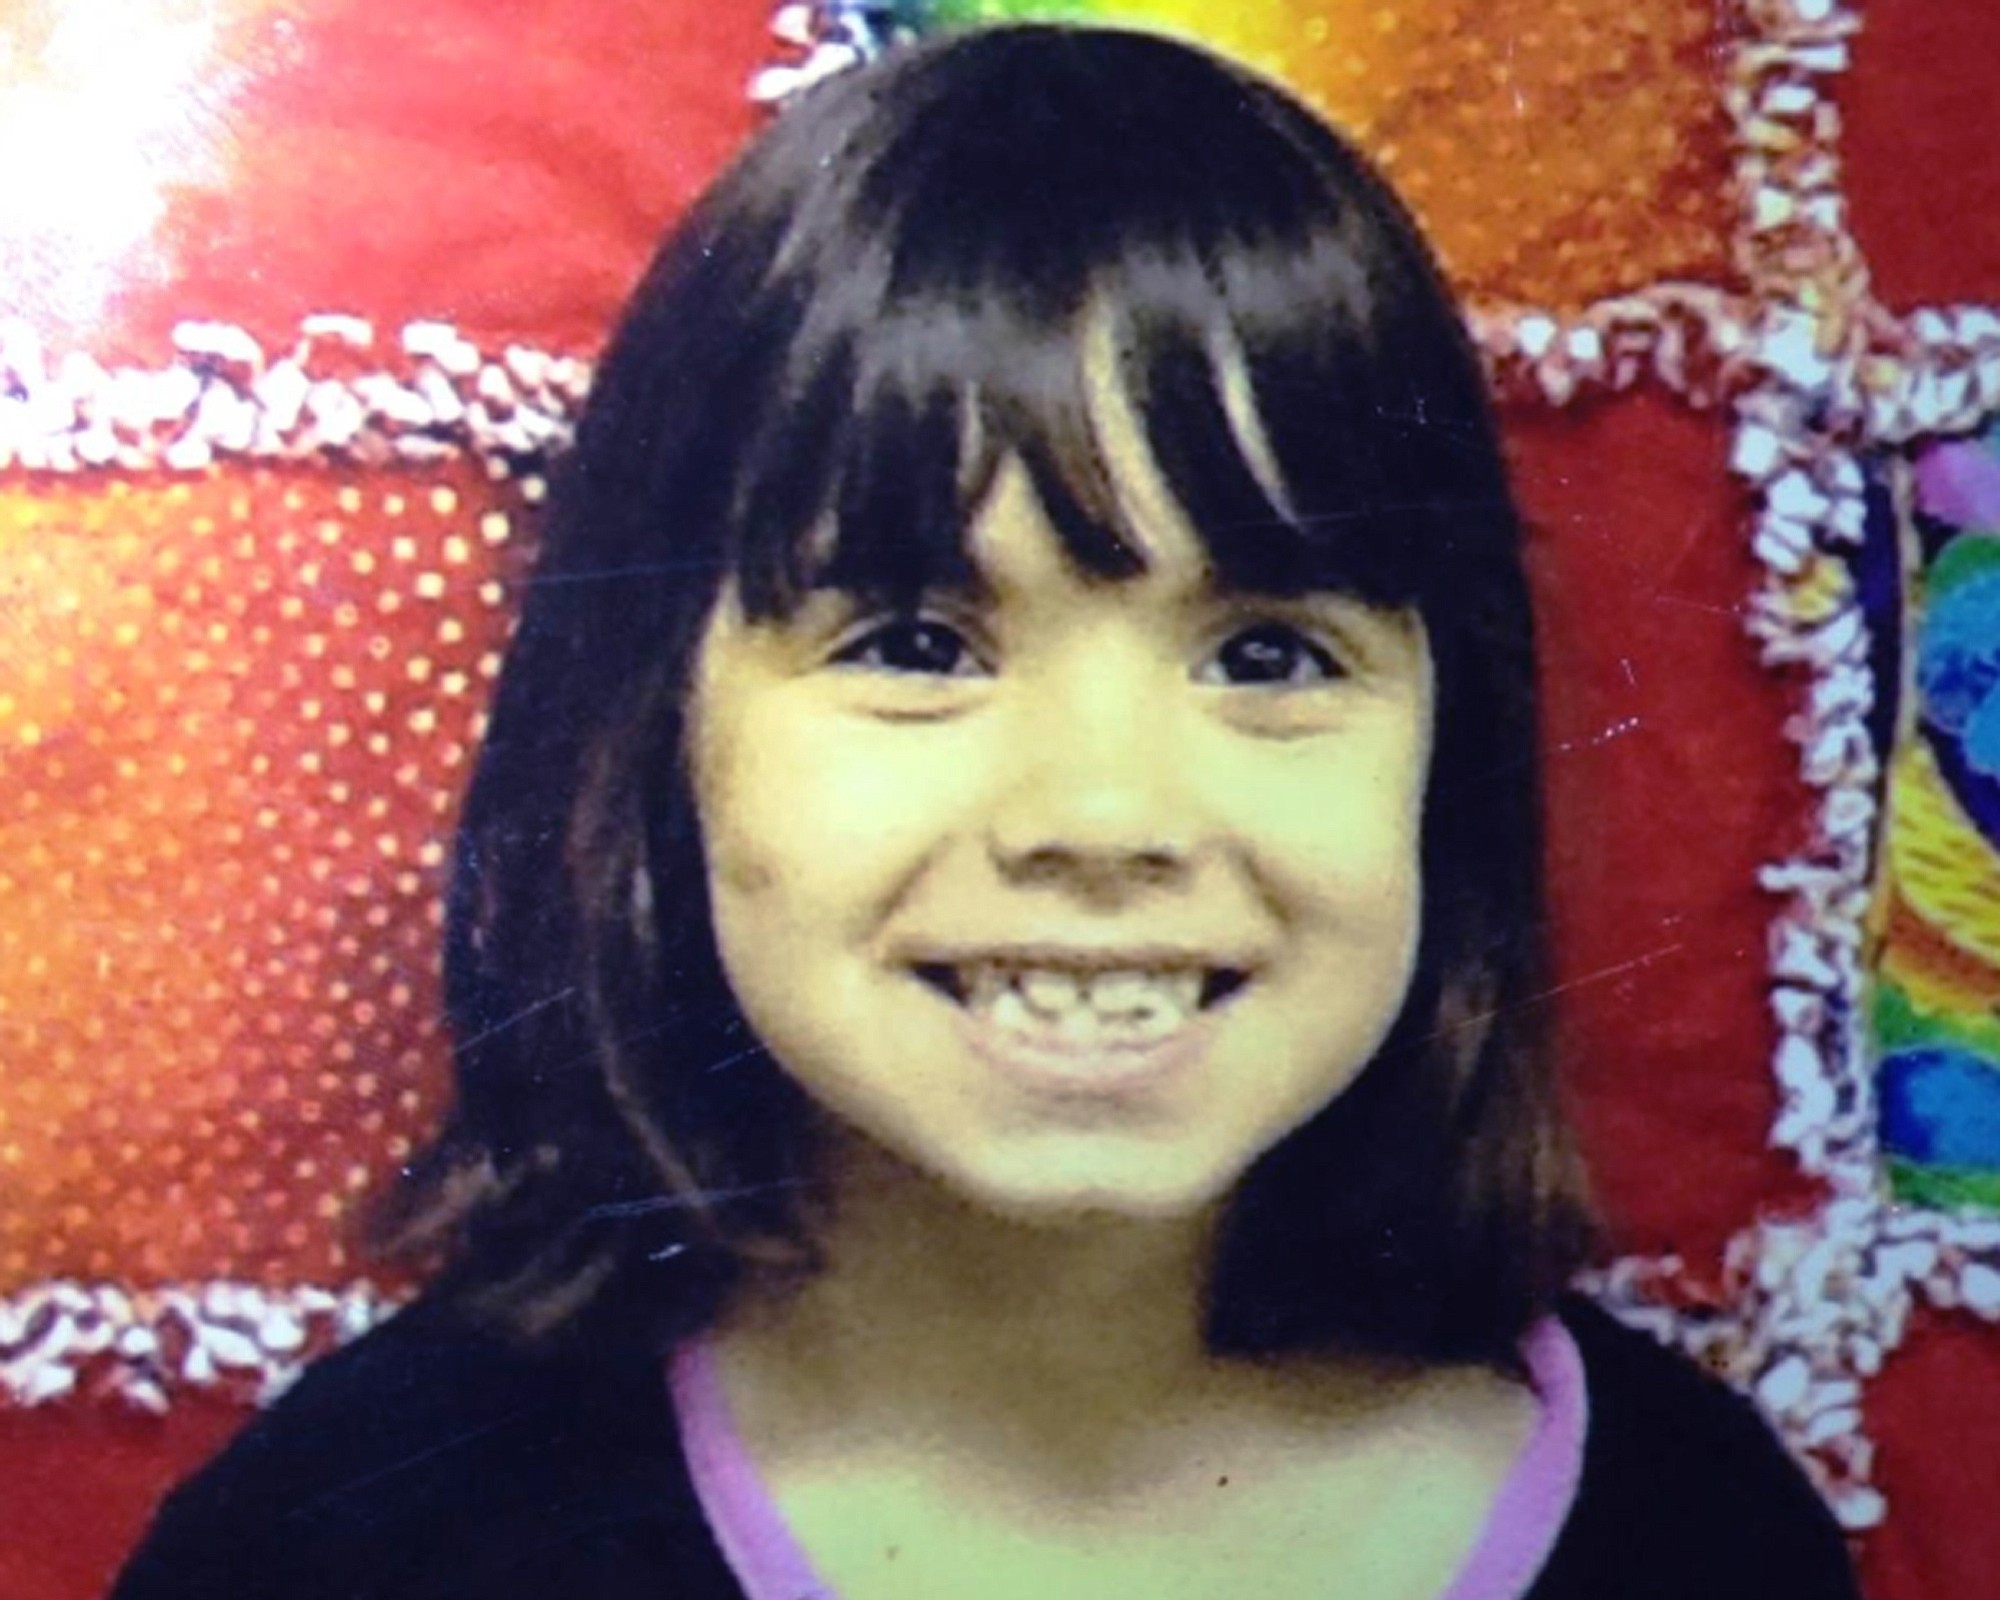 Jenise Paulette Wright. Kitsap County sheriff's deputies are searching for Jenise, 6, who is missing and was last seen Aug. 2 at her home in east Bremerton.